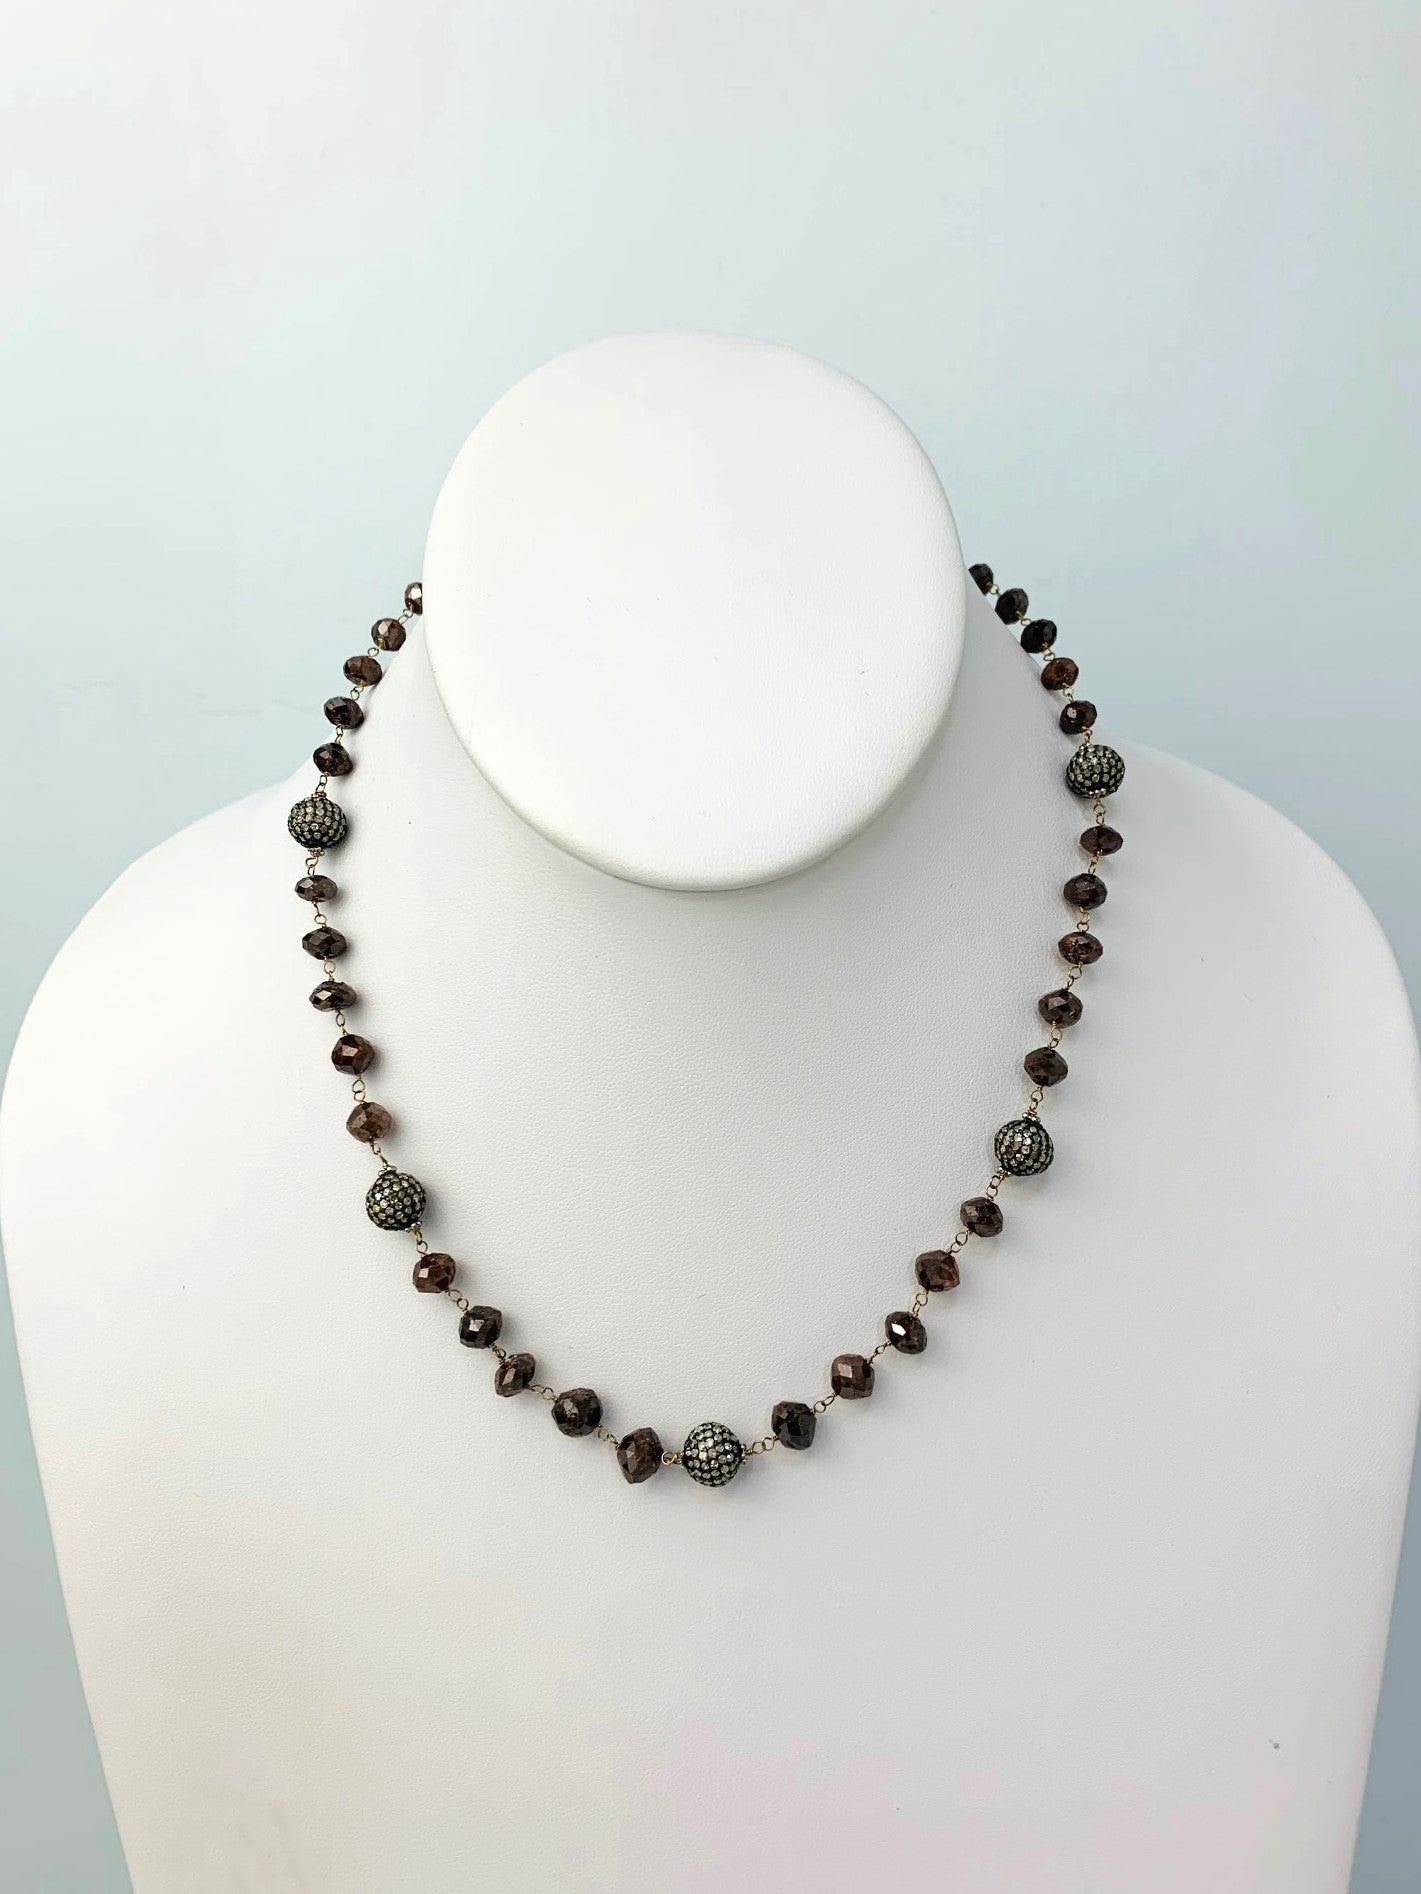 17" Reddish Brown Diamond Rosary Necklace With Blackened Sterling Silver Pave Diamond Beads in 14KW, SS - NCK-387-DCOROSDIA14WSS-BRN-17 55ctw